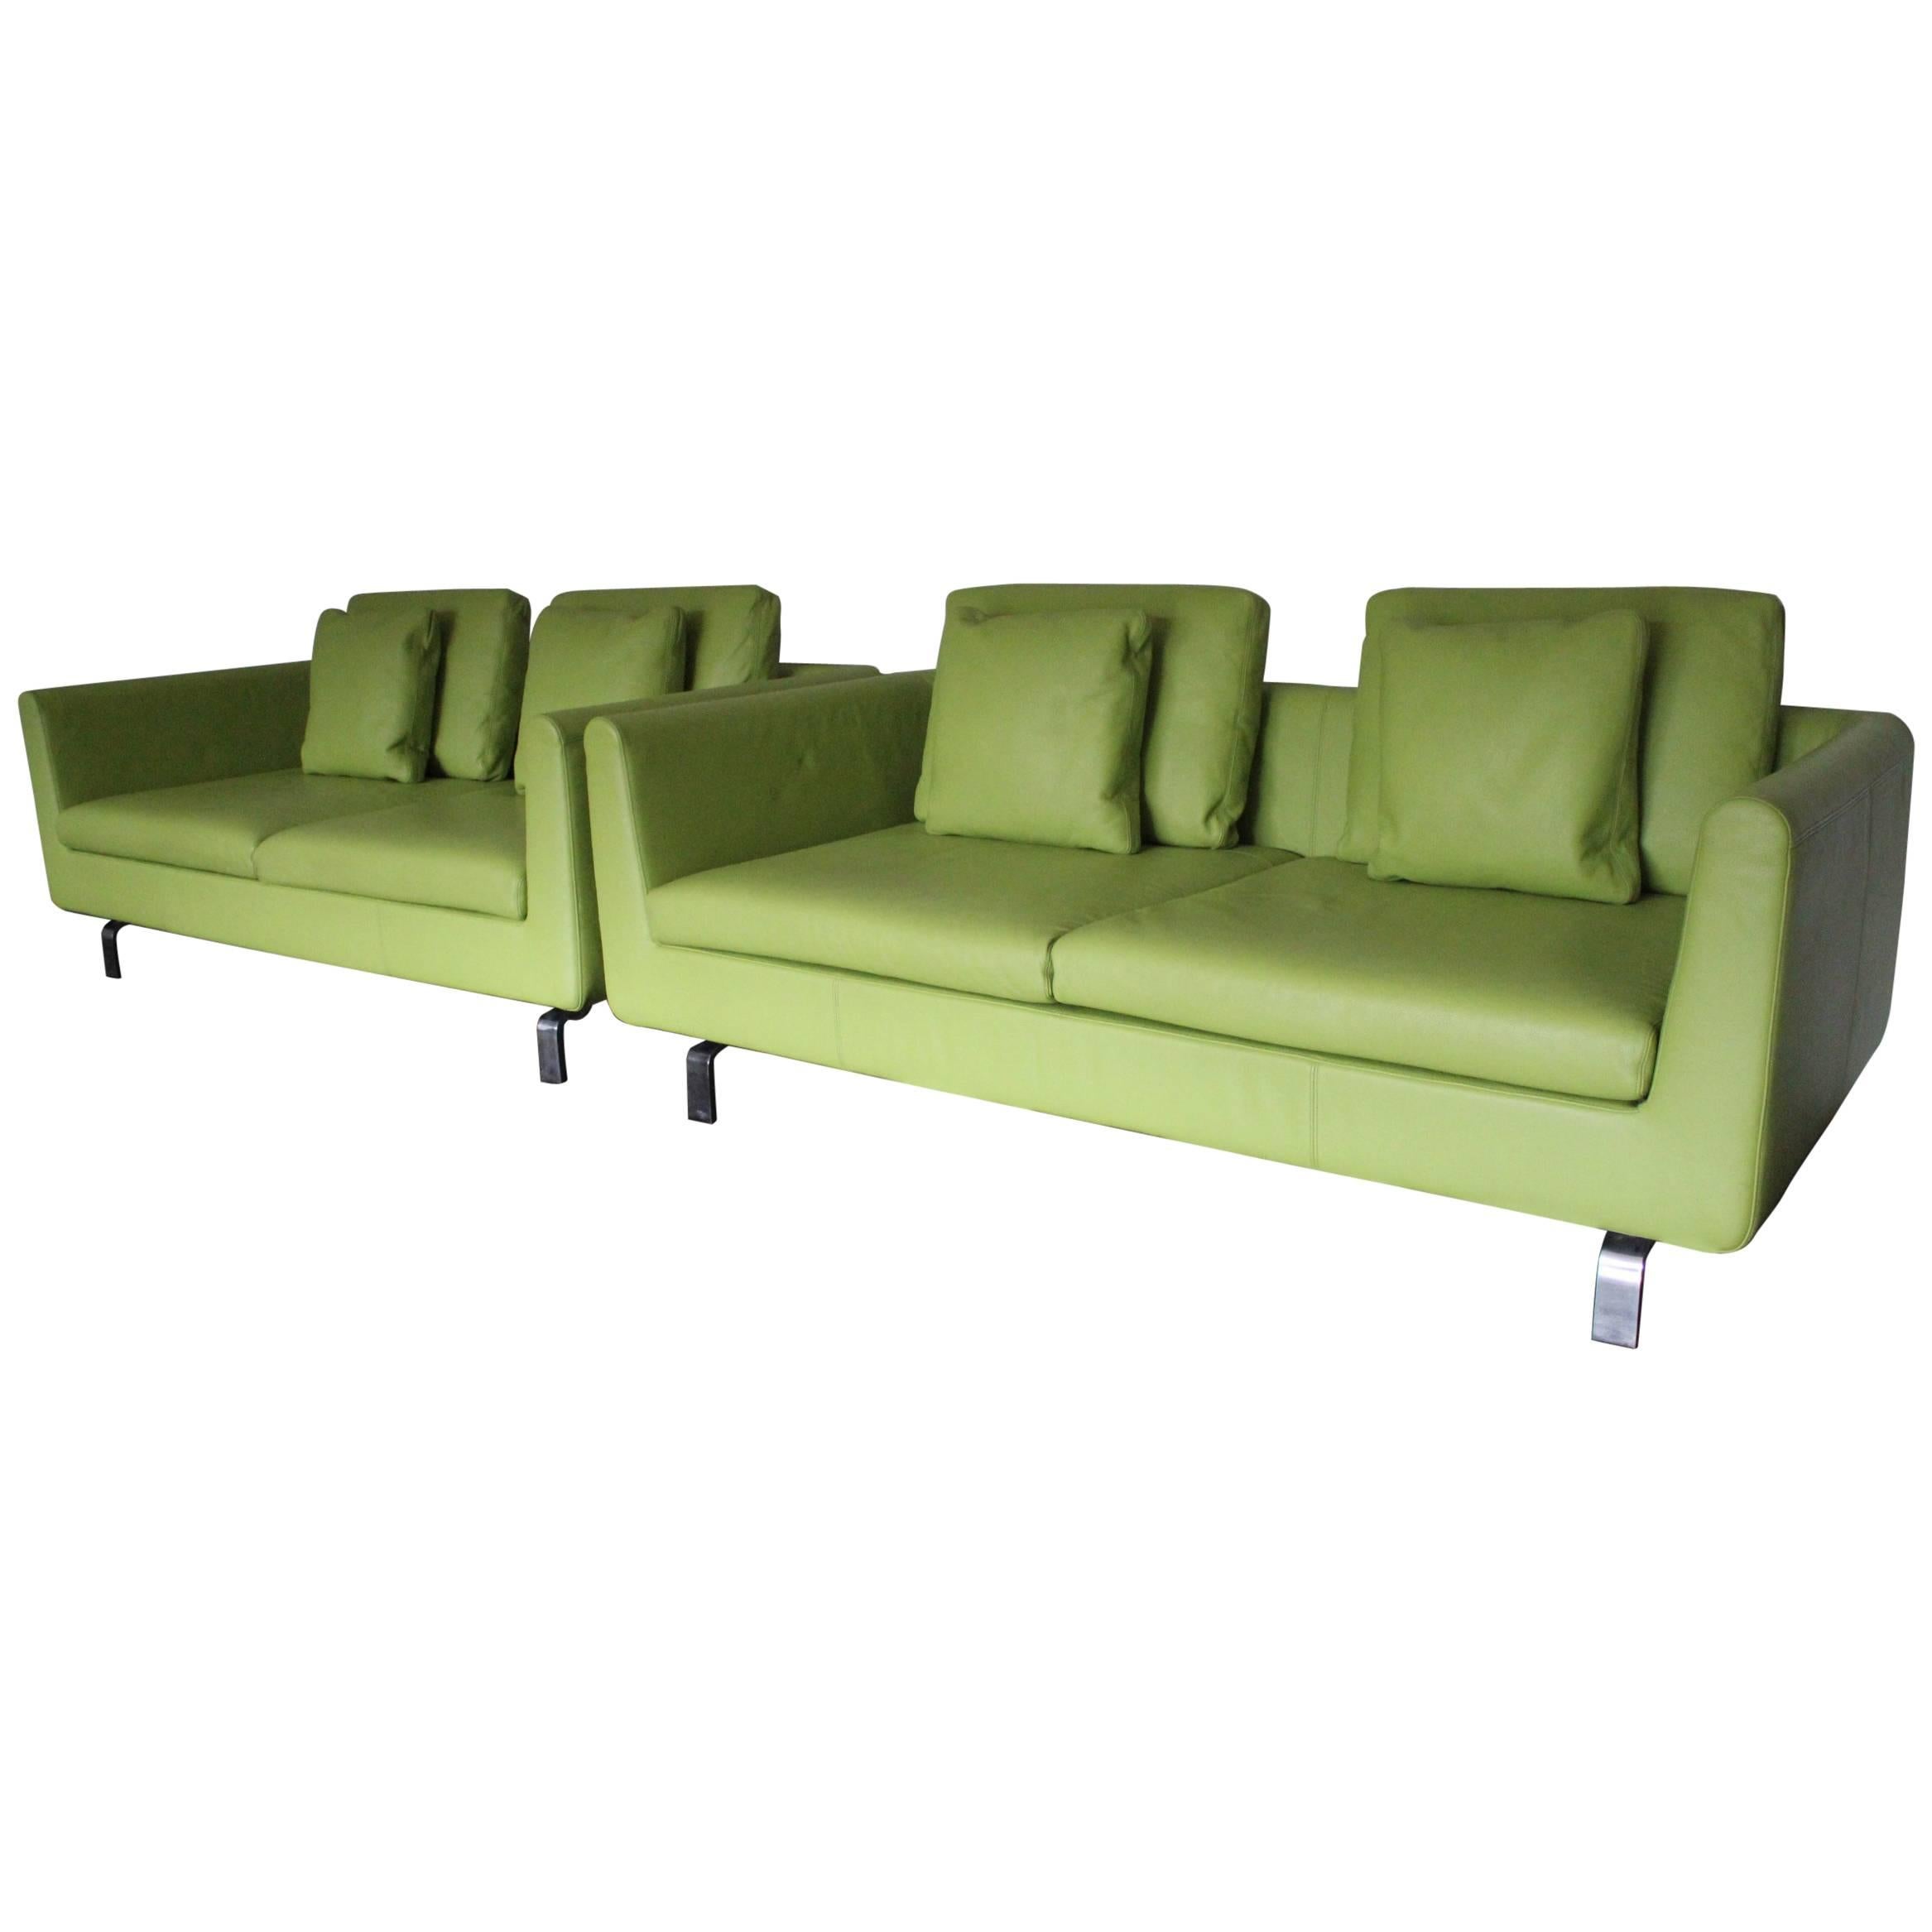 Pair of Walter Knoll 2.5-Seat Sofa in Pristine Lime-Green “Pelle” Leather